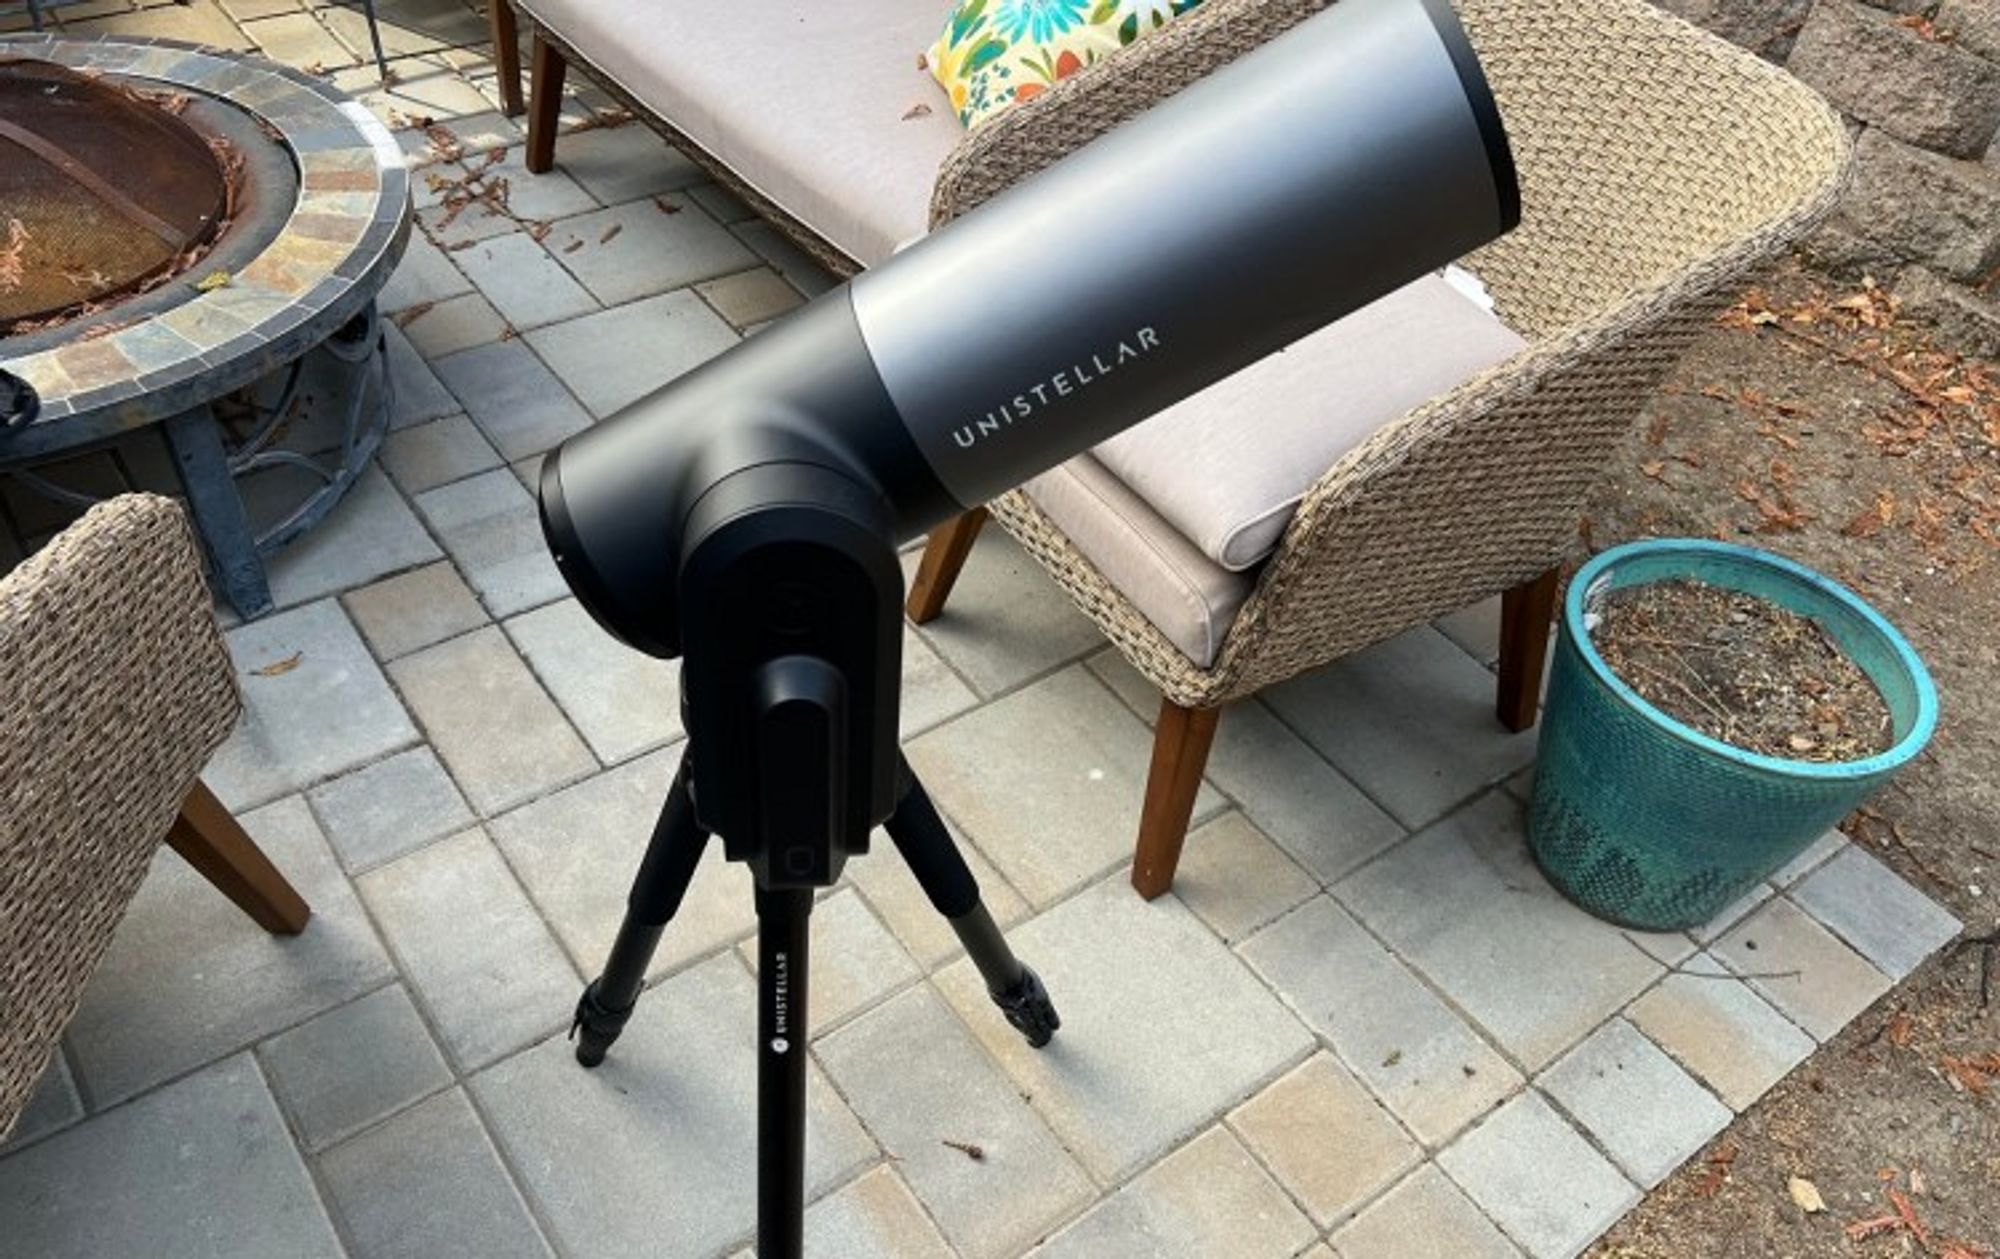 Unistellar's AI telescope lets you view galaxies in the night sky from the city | VentureBeat